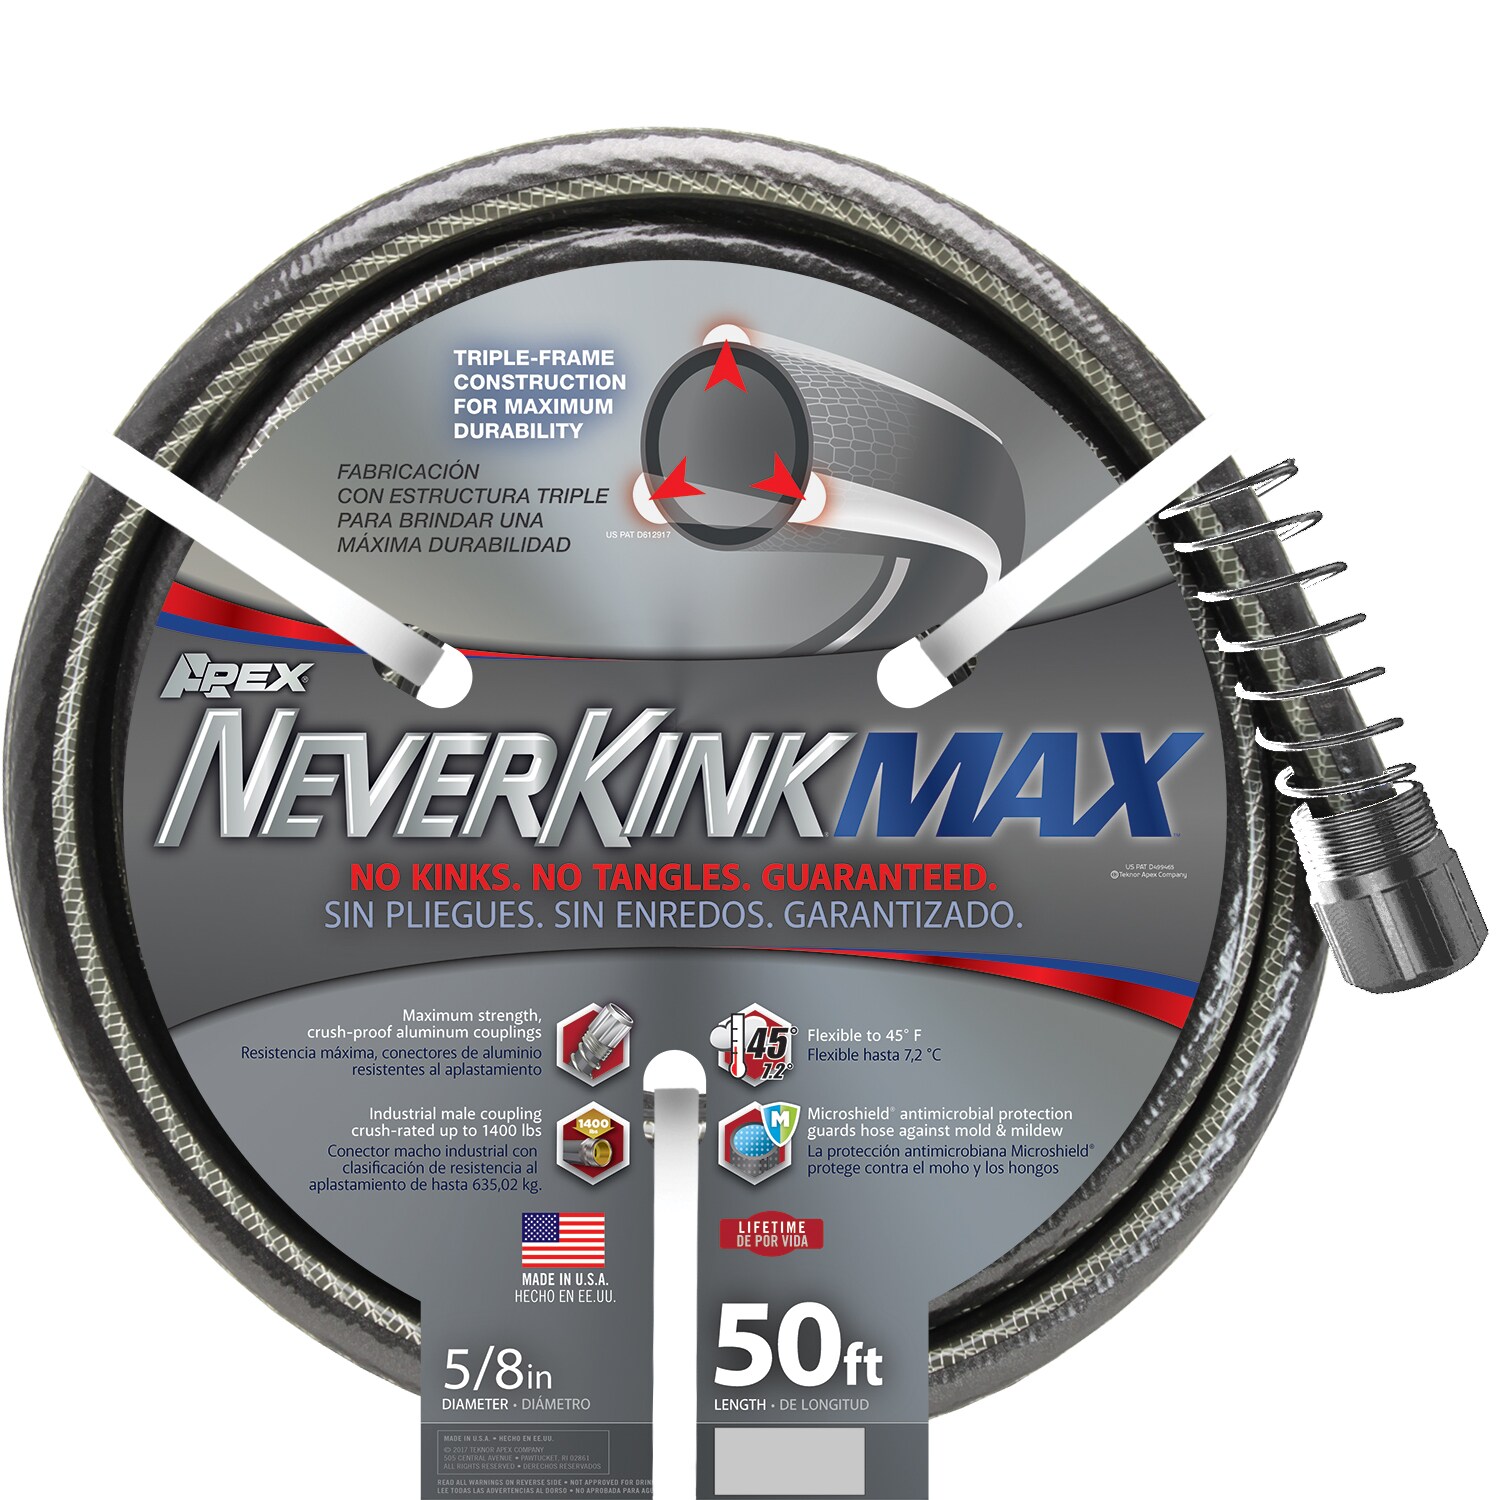 Teknor Apex Neverkink Max 5/8-in 50-ft Premium-Duty Kink Gray Coiled Hose the Garden Hoses department at Lowes.com